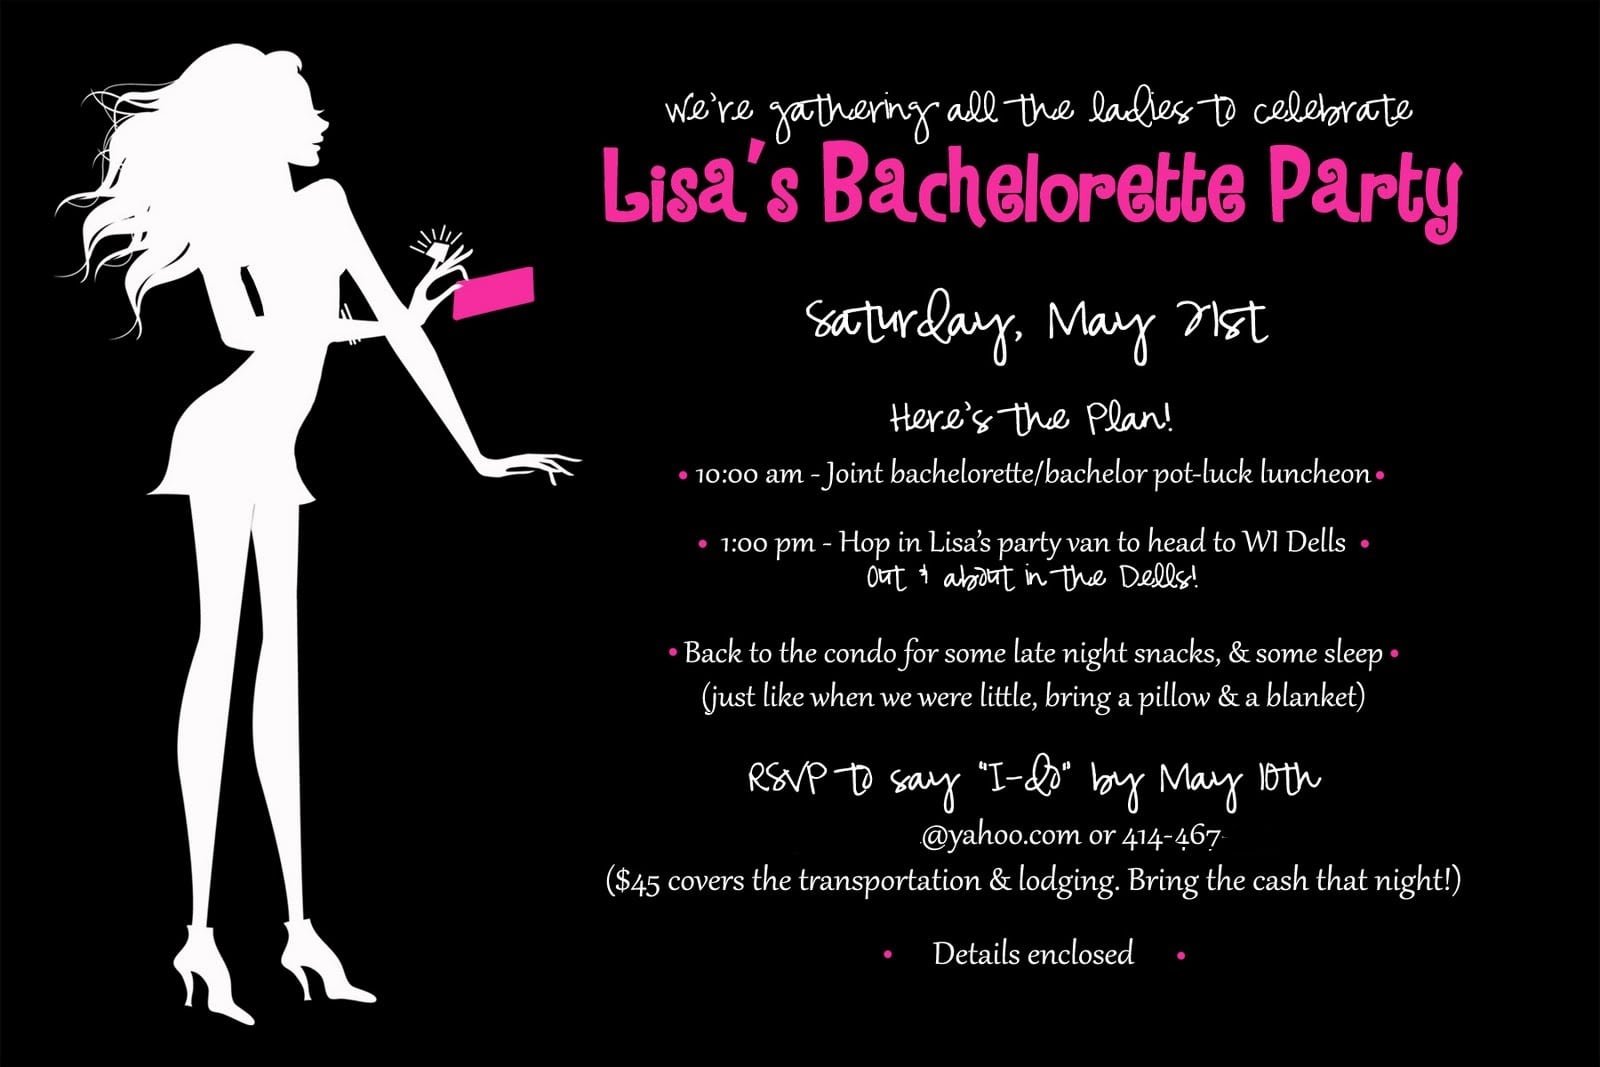 Bachelor Party Invitation Email Template  Invite 1 55 Card Stash